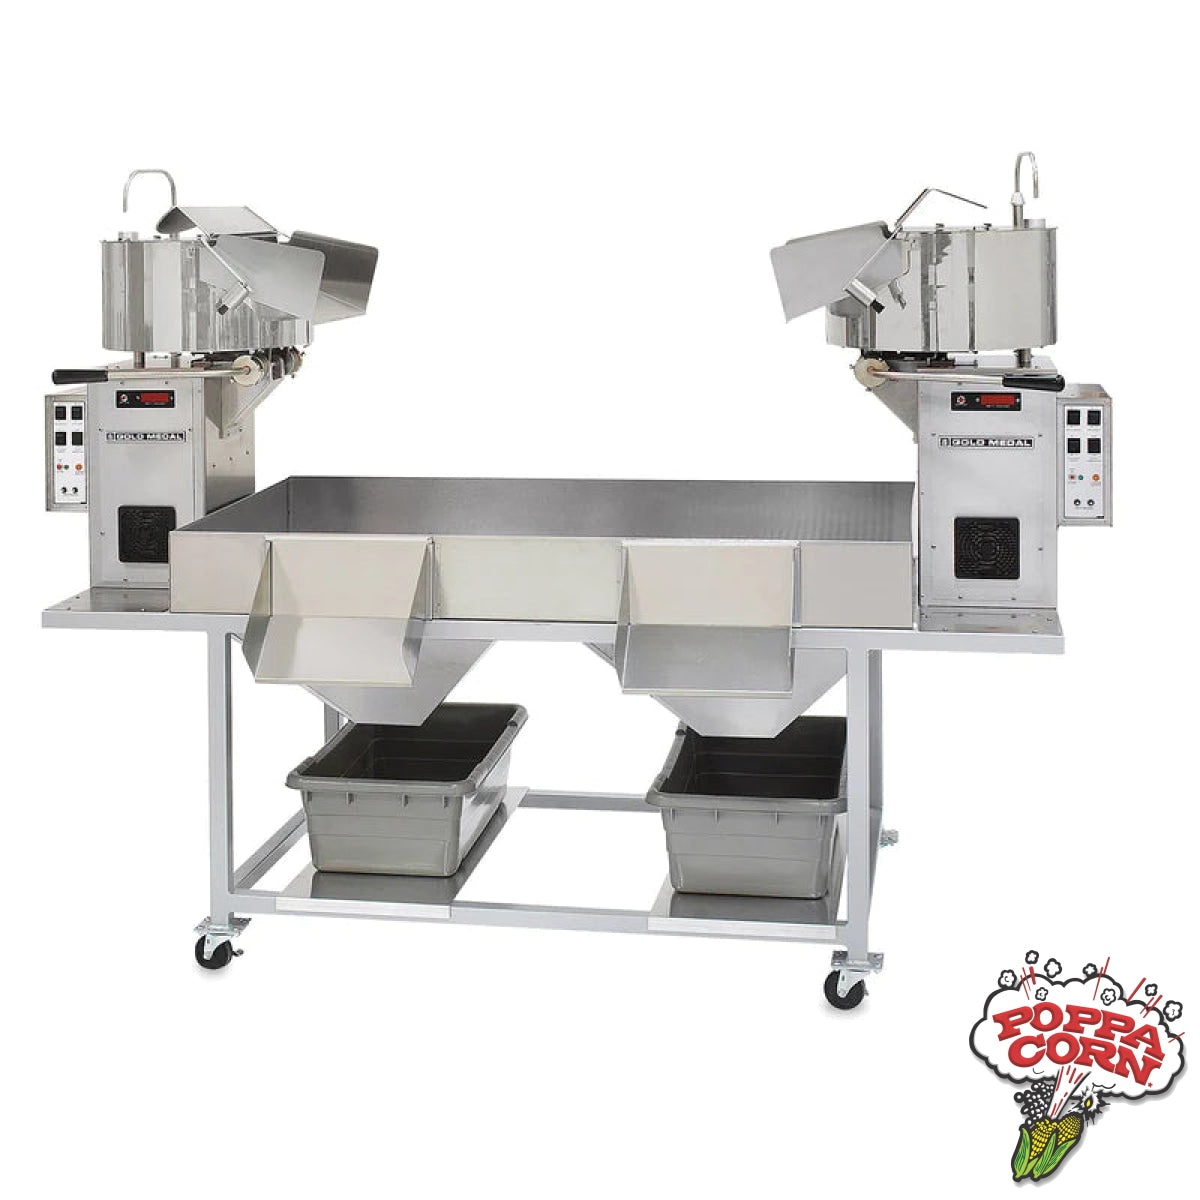 High-Production Pro Plant System - Twin Kettle Butterfly Popcorn Table - GM2791-00-000 - Poppa Corn Corp